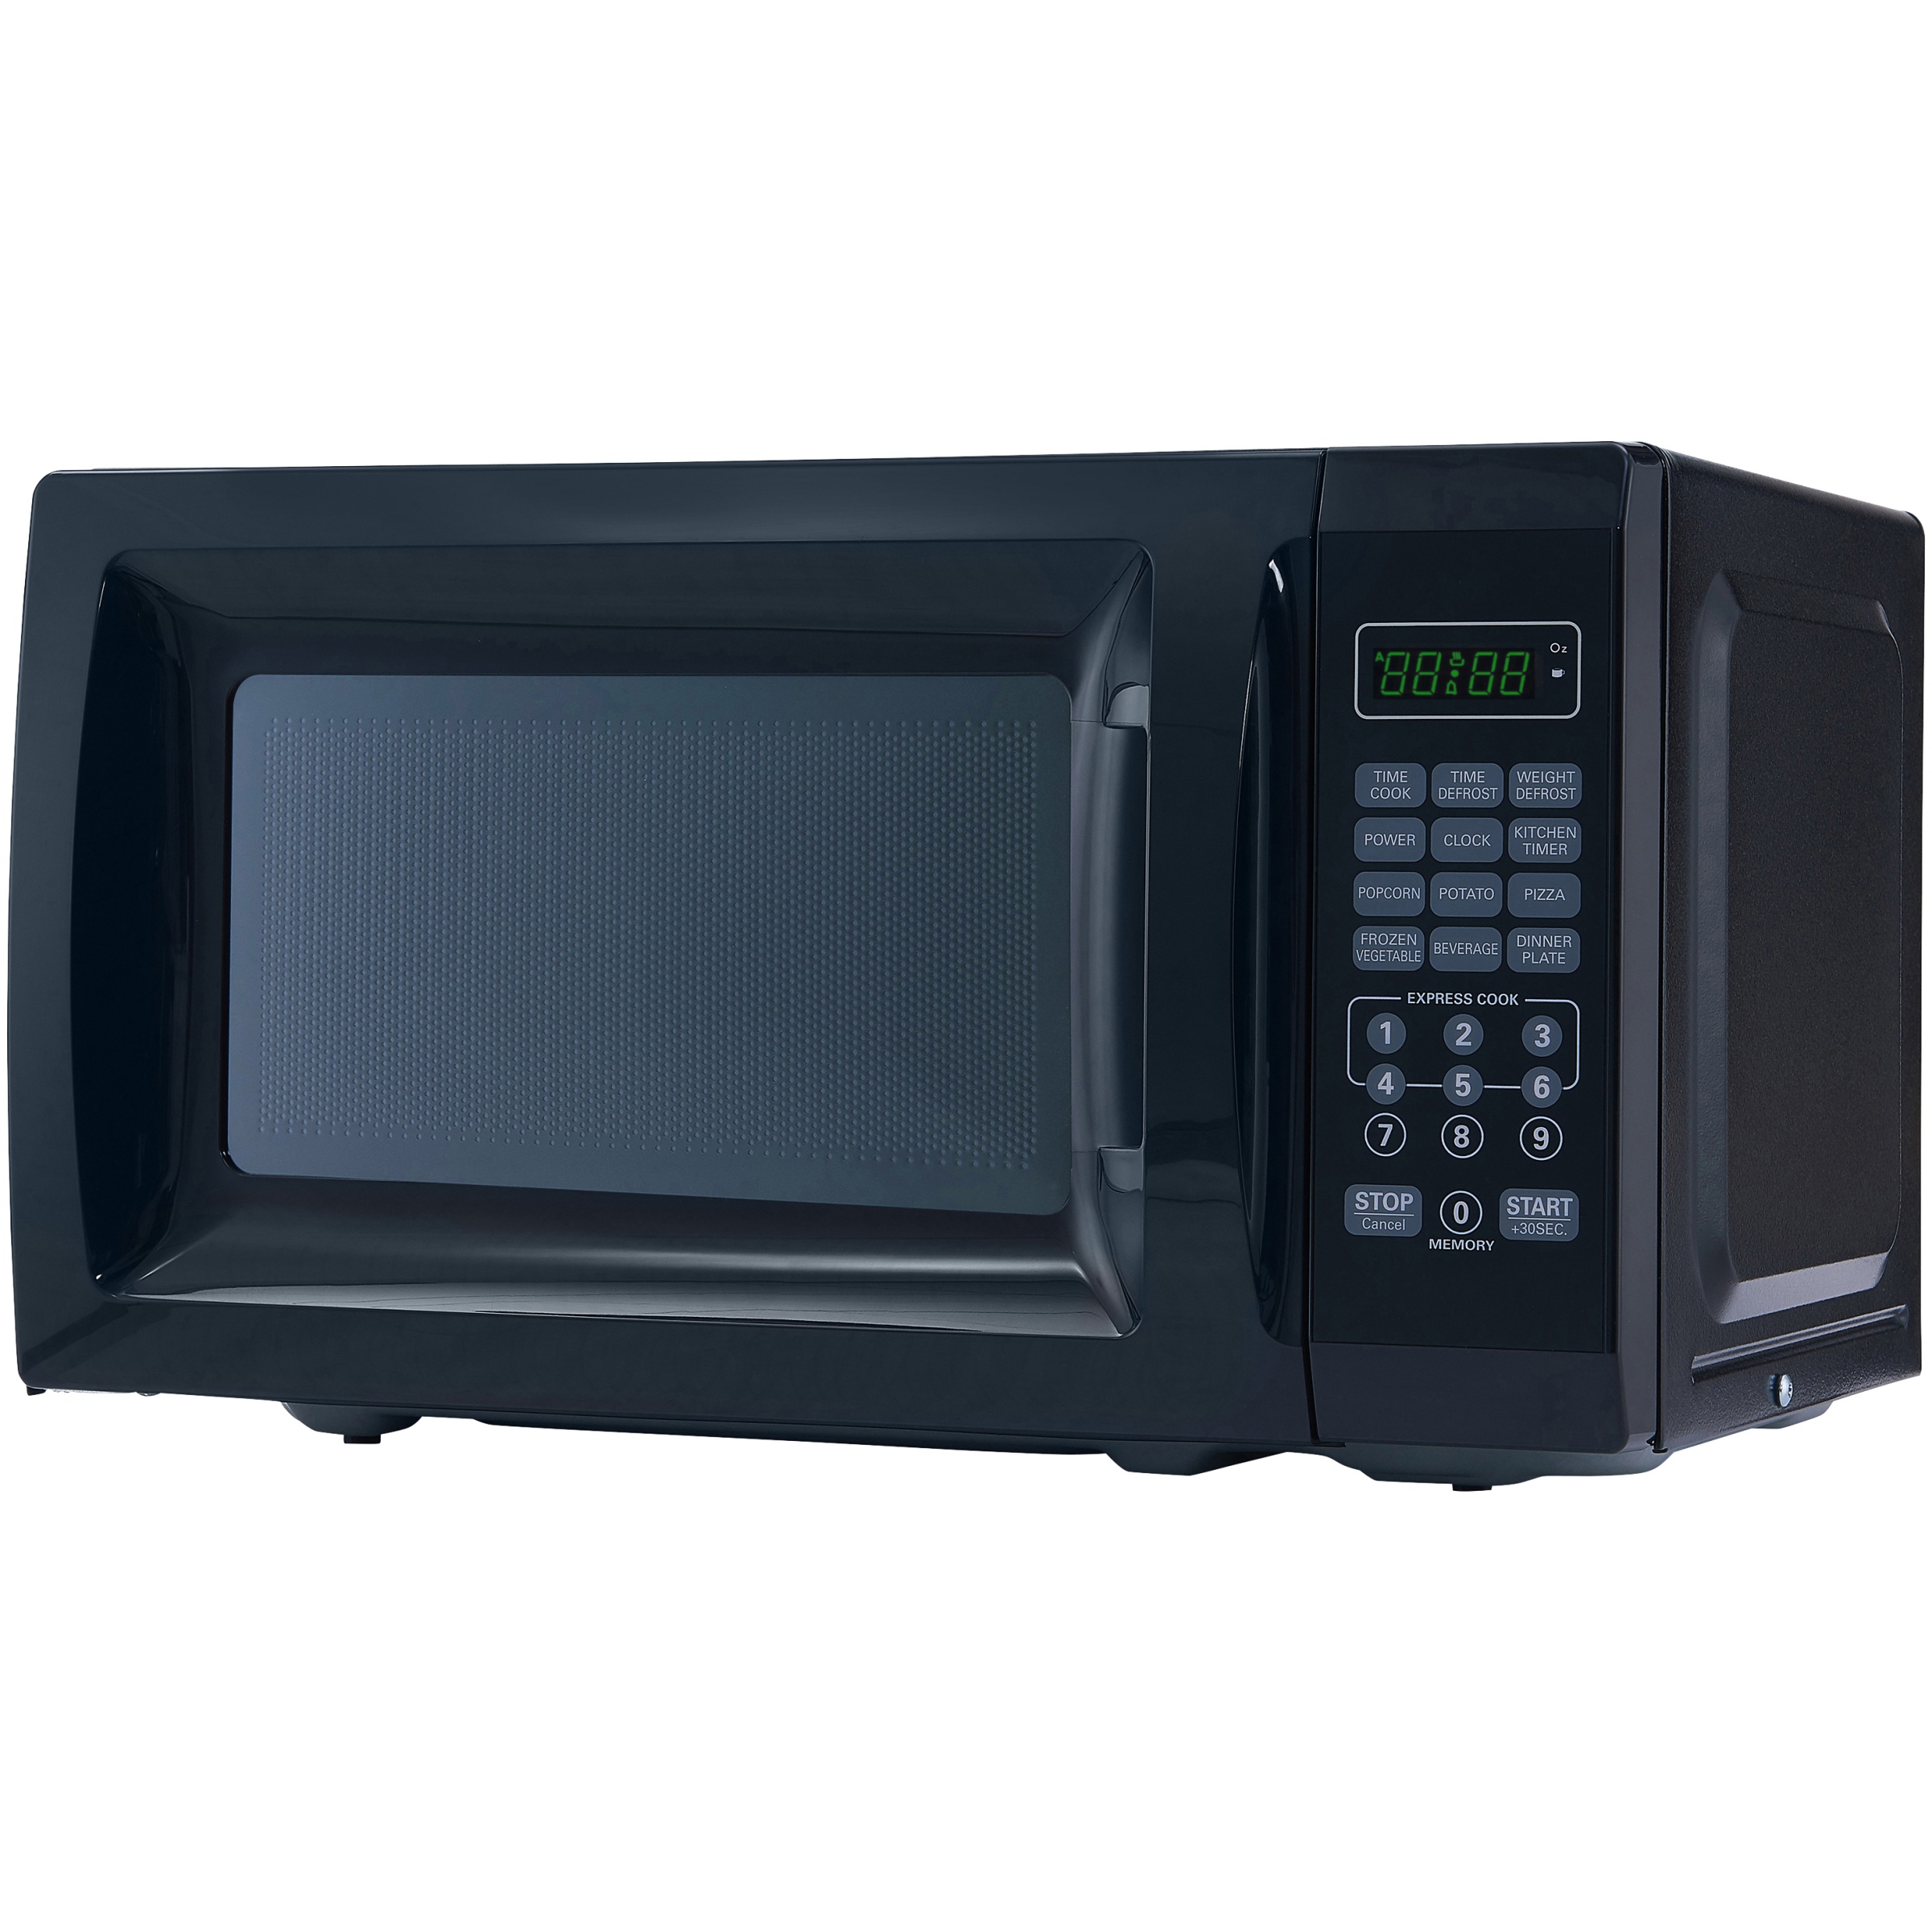 Mainstays 0.7 Cu. Ft. 700W Black Microwave Oven - image 1 of 8